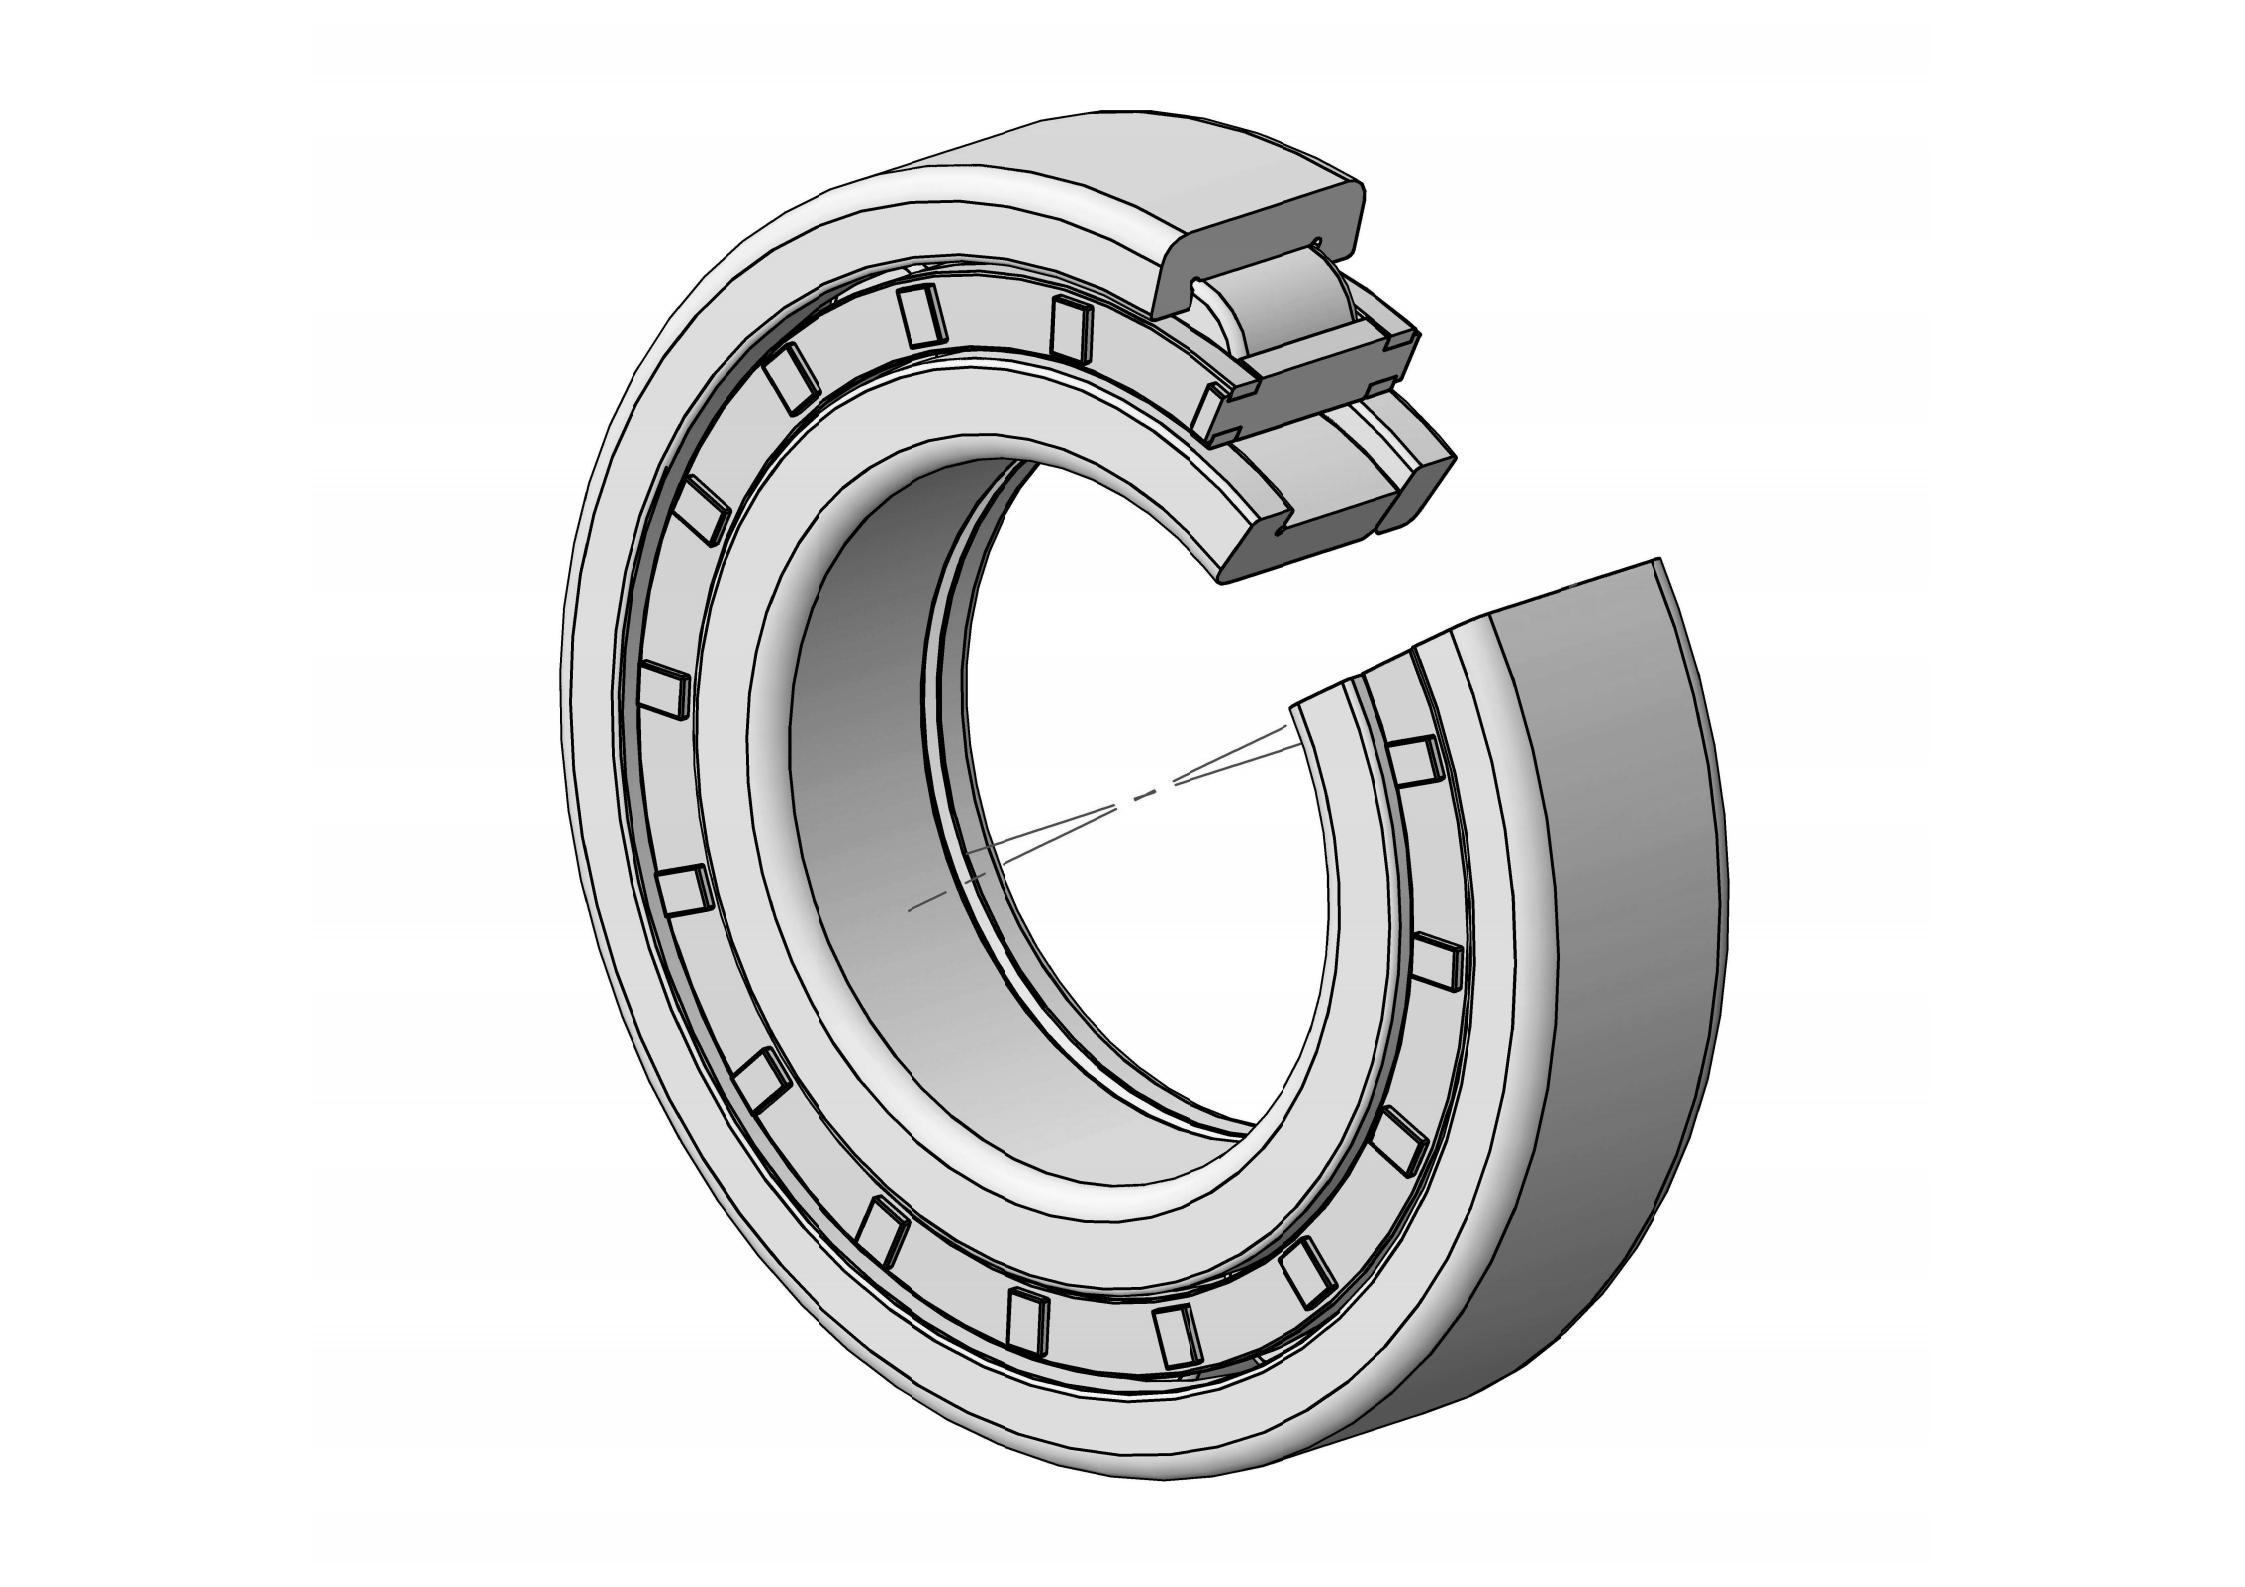 NUP205-E Single Row Cylindrical roller bearing 